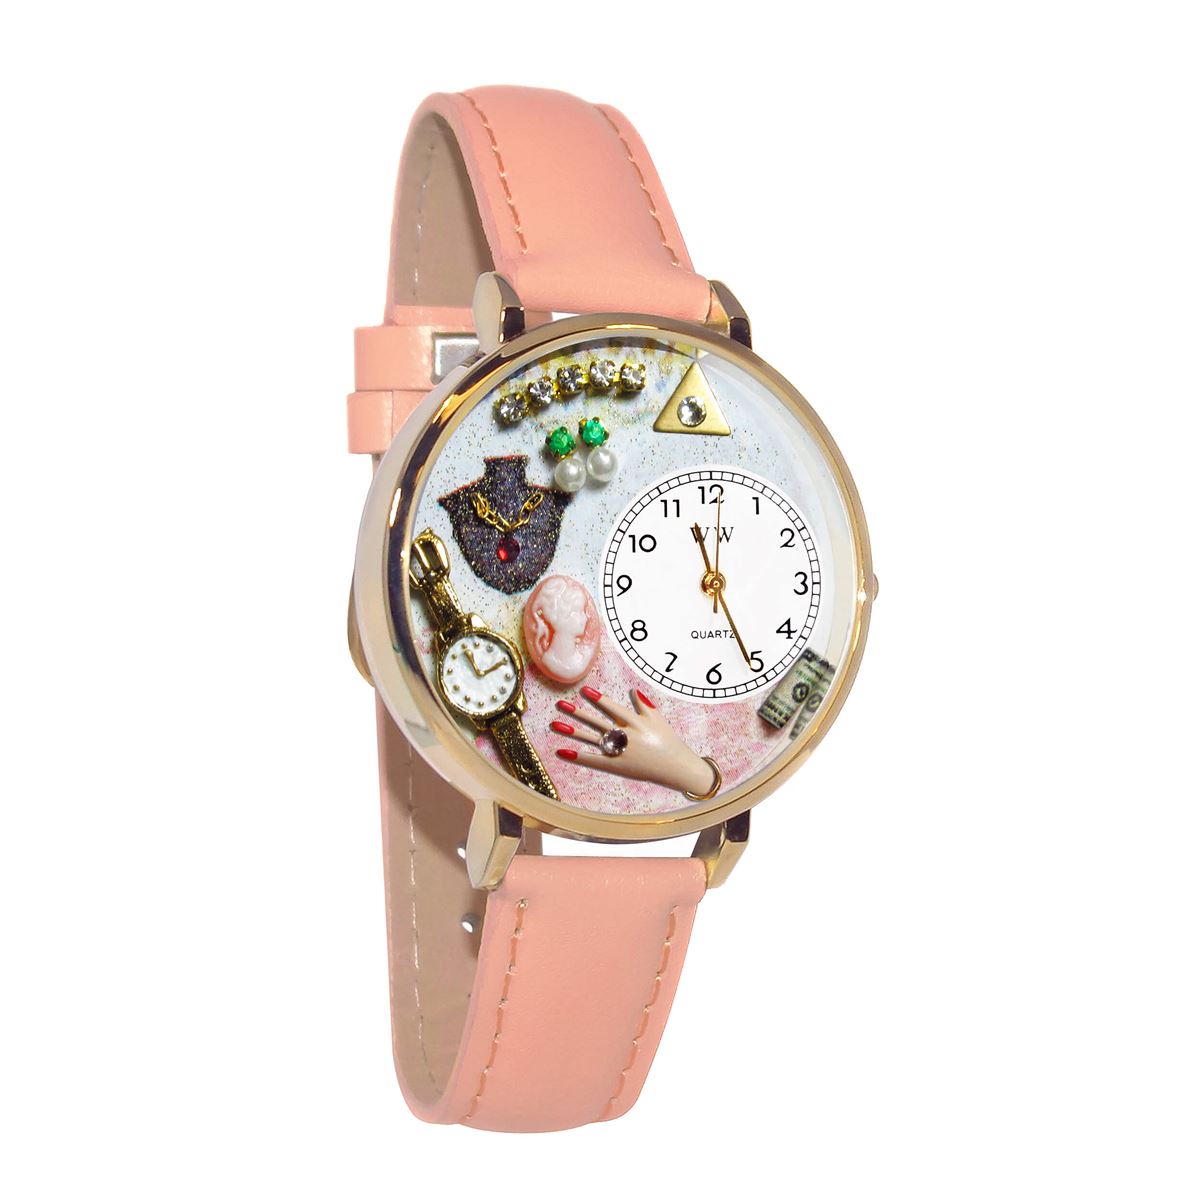 Whimsical Gifts | Jewelry Lover Pink 3D Watch Large Style | Handmade in USA | Hobbies & Special Interests | Fashionista | Novelty Unique Fun Miniatures Gift | Gold Finish Pink Leather Watch Band